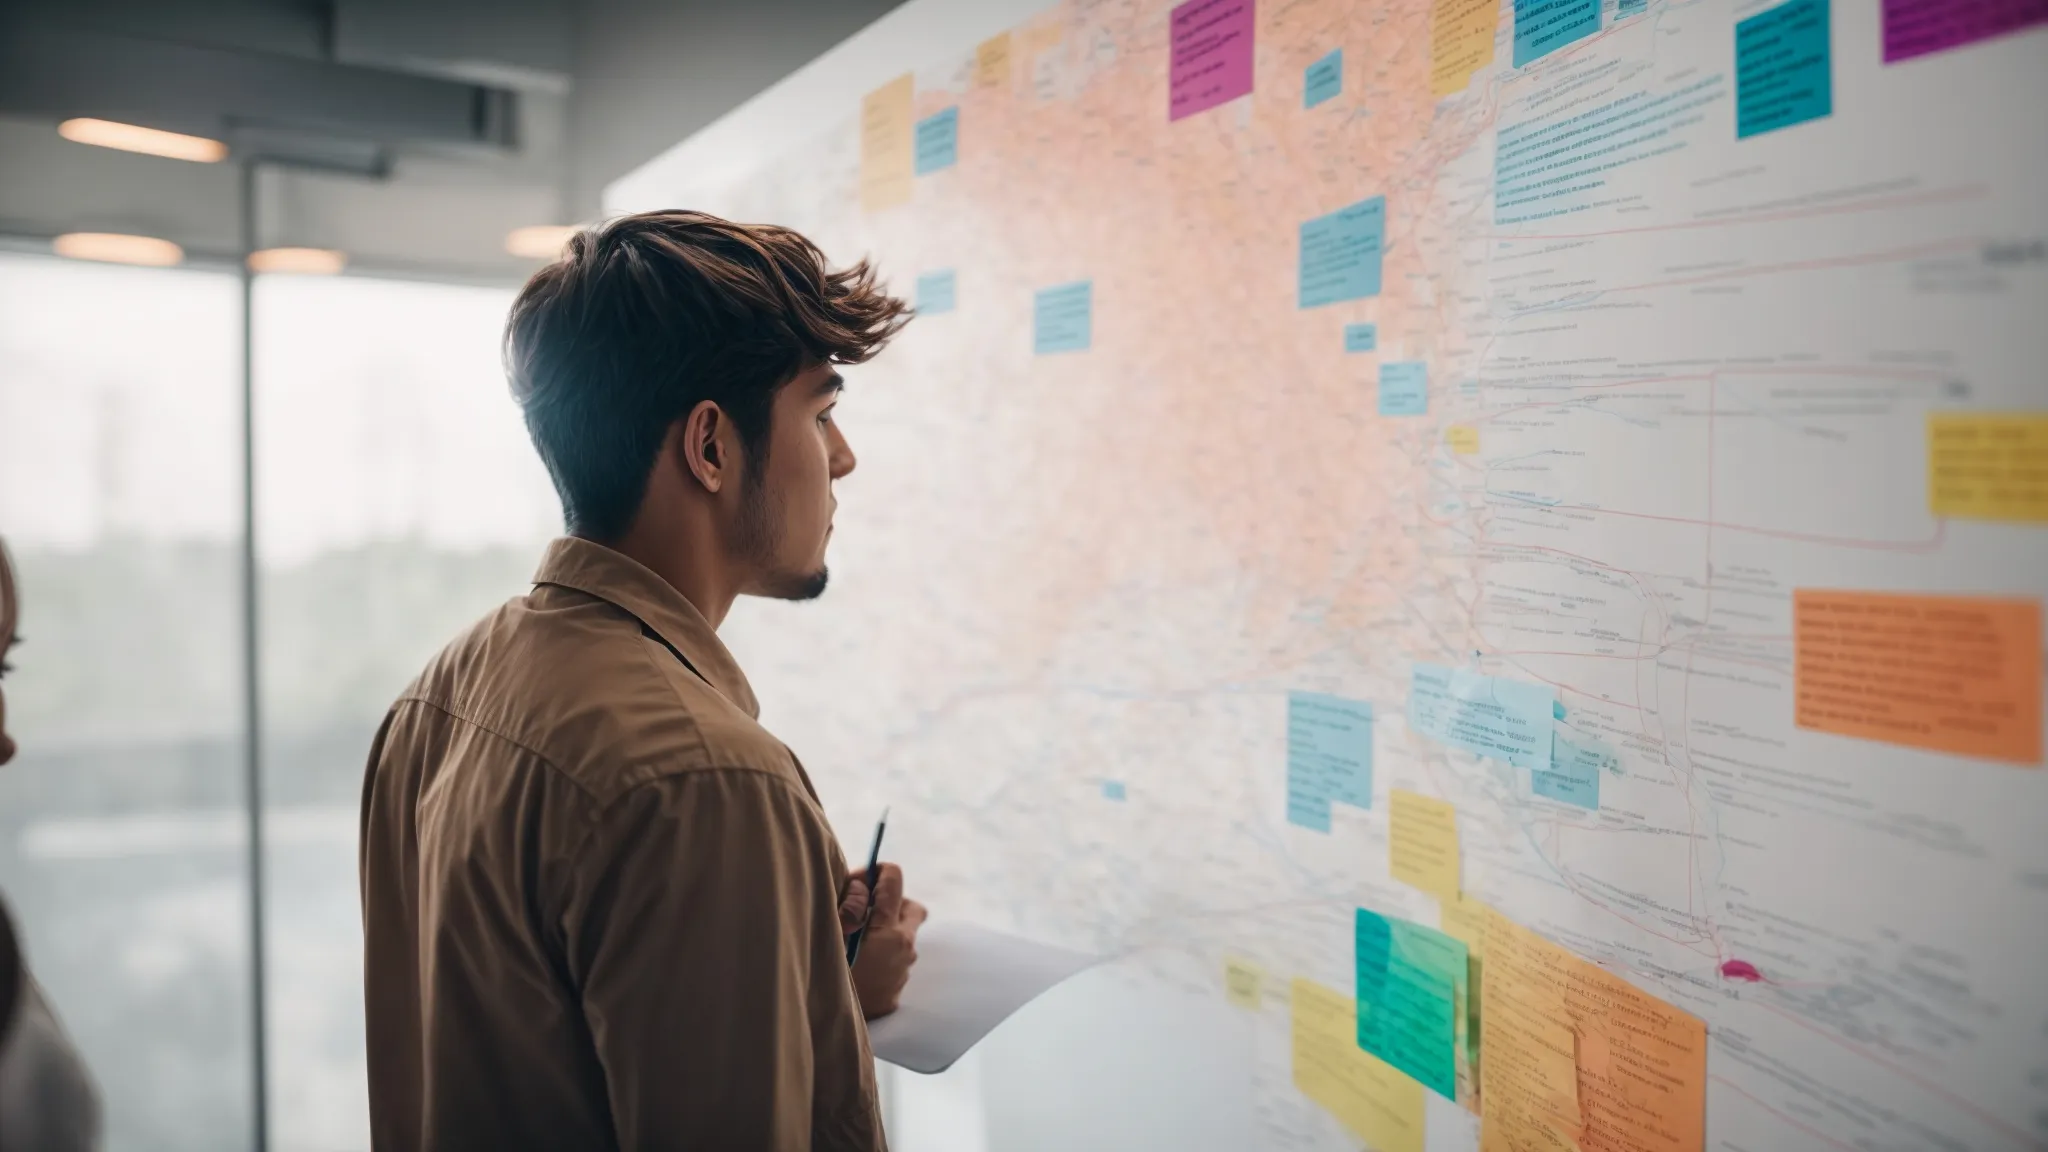 a focused individual intently studies a colorful, sprawling mind map on a whiteboard, illustrating connections between various search terms.